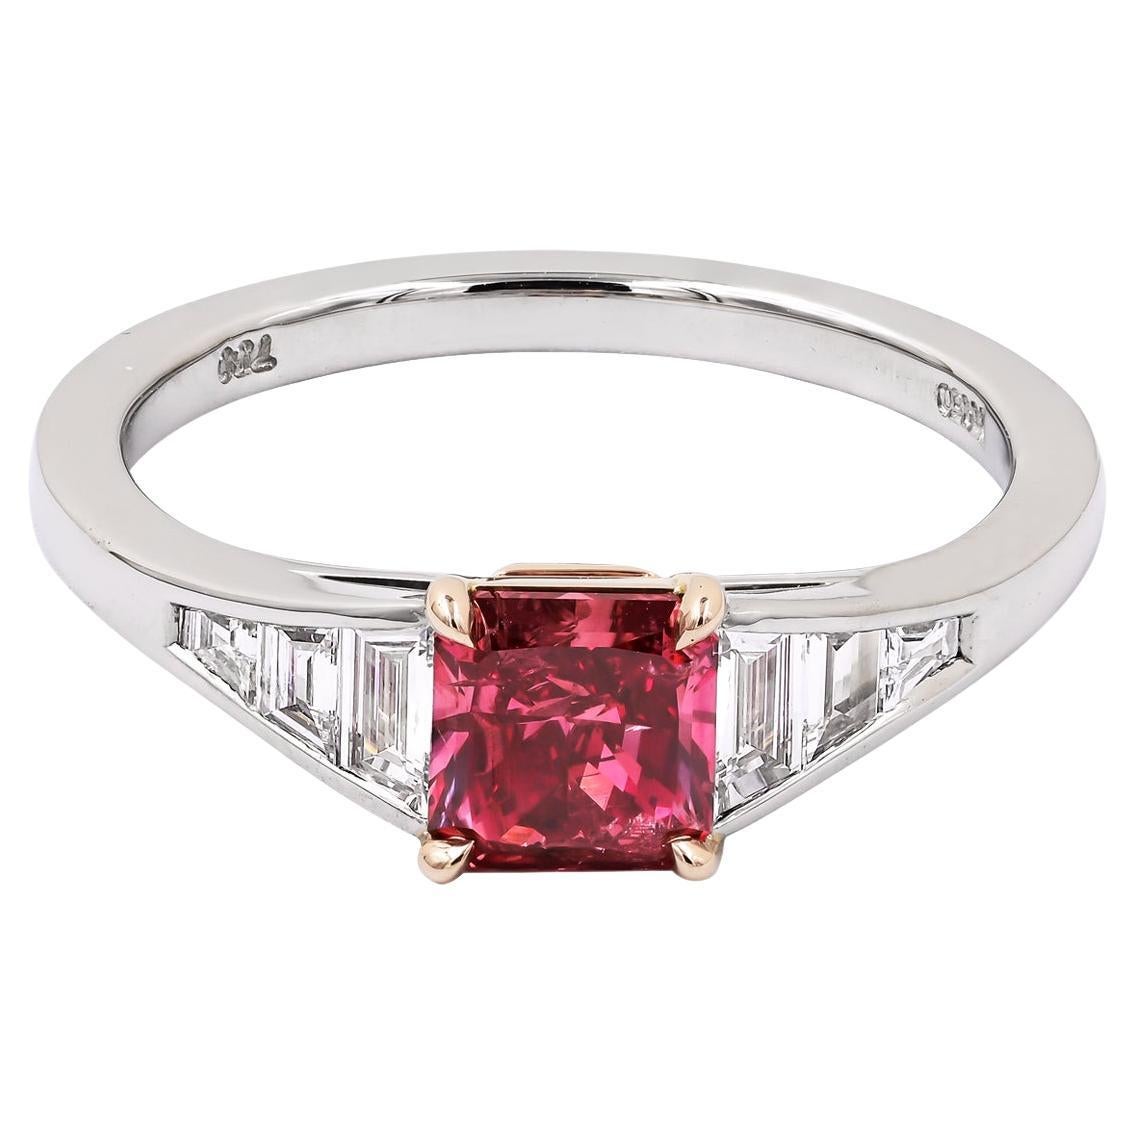 Spectra Fine Jewelry GIA Certified 0.76 Carat Radiant-cut Red Diamond Ring